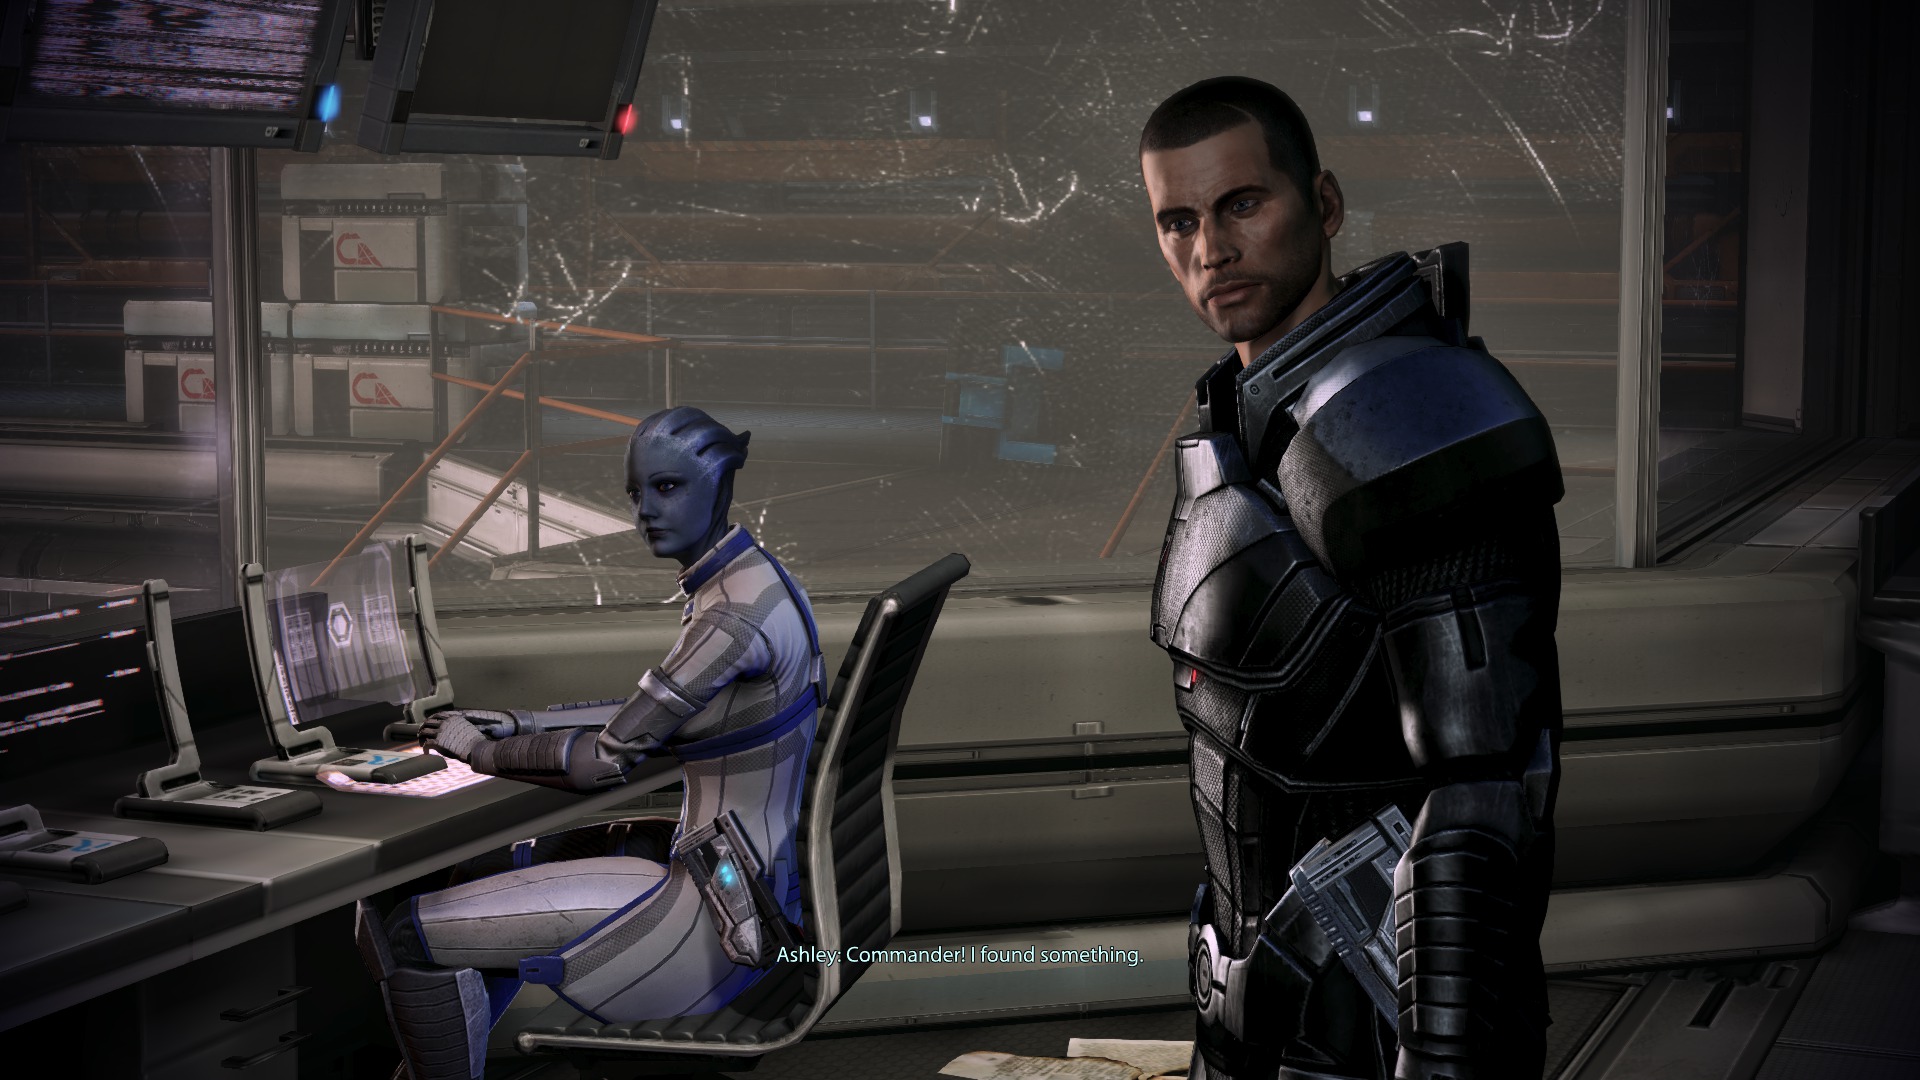 What happens if you cheat on liara in mass effect 3?